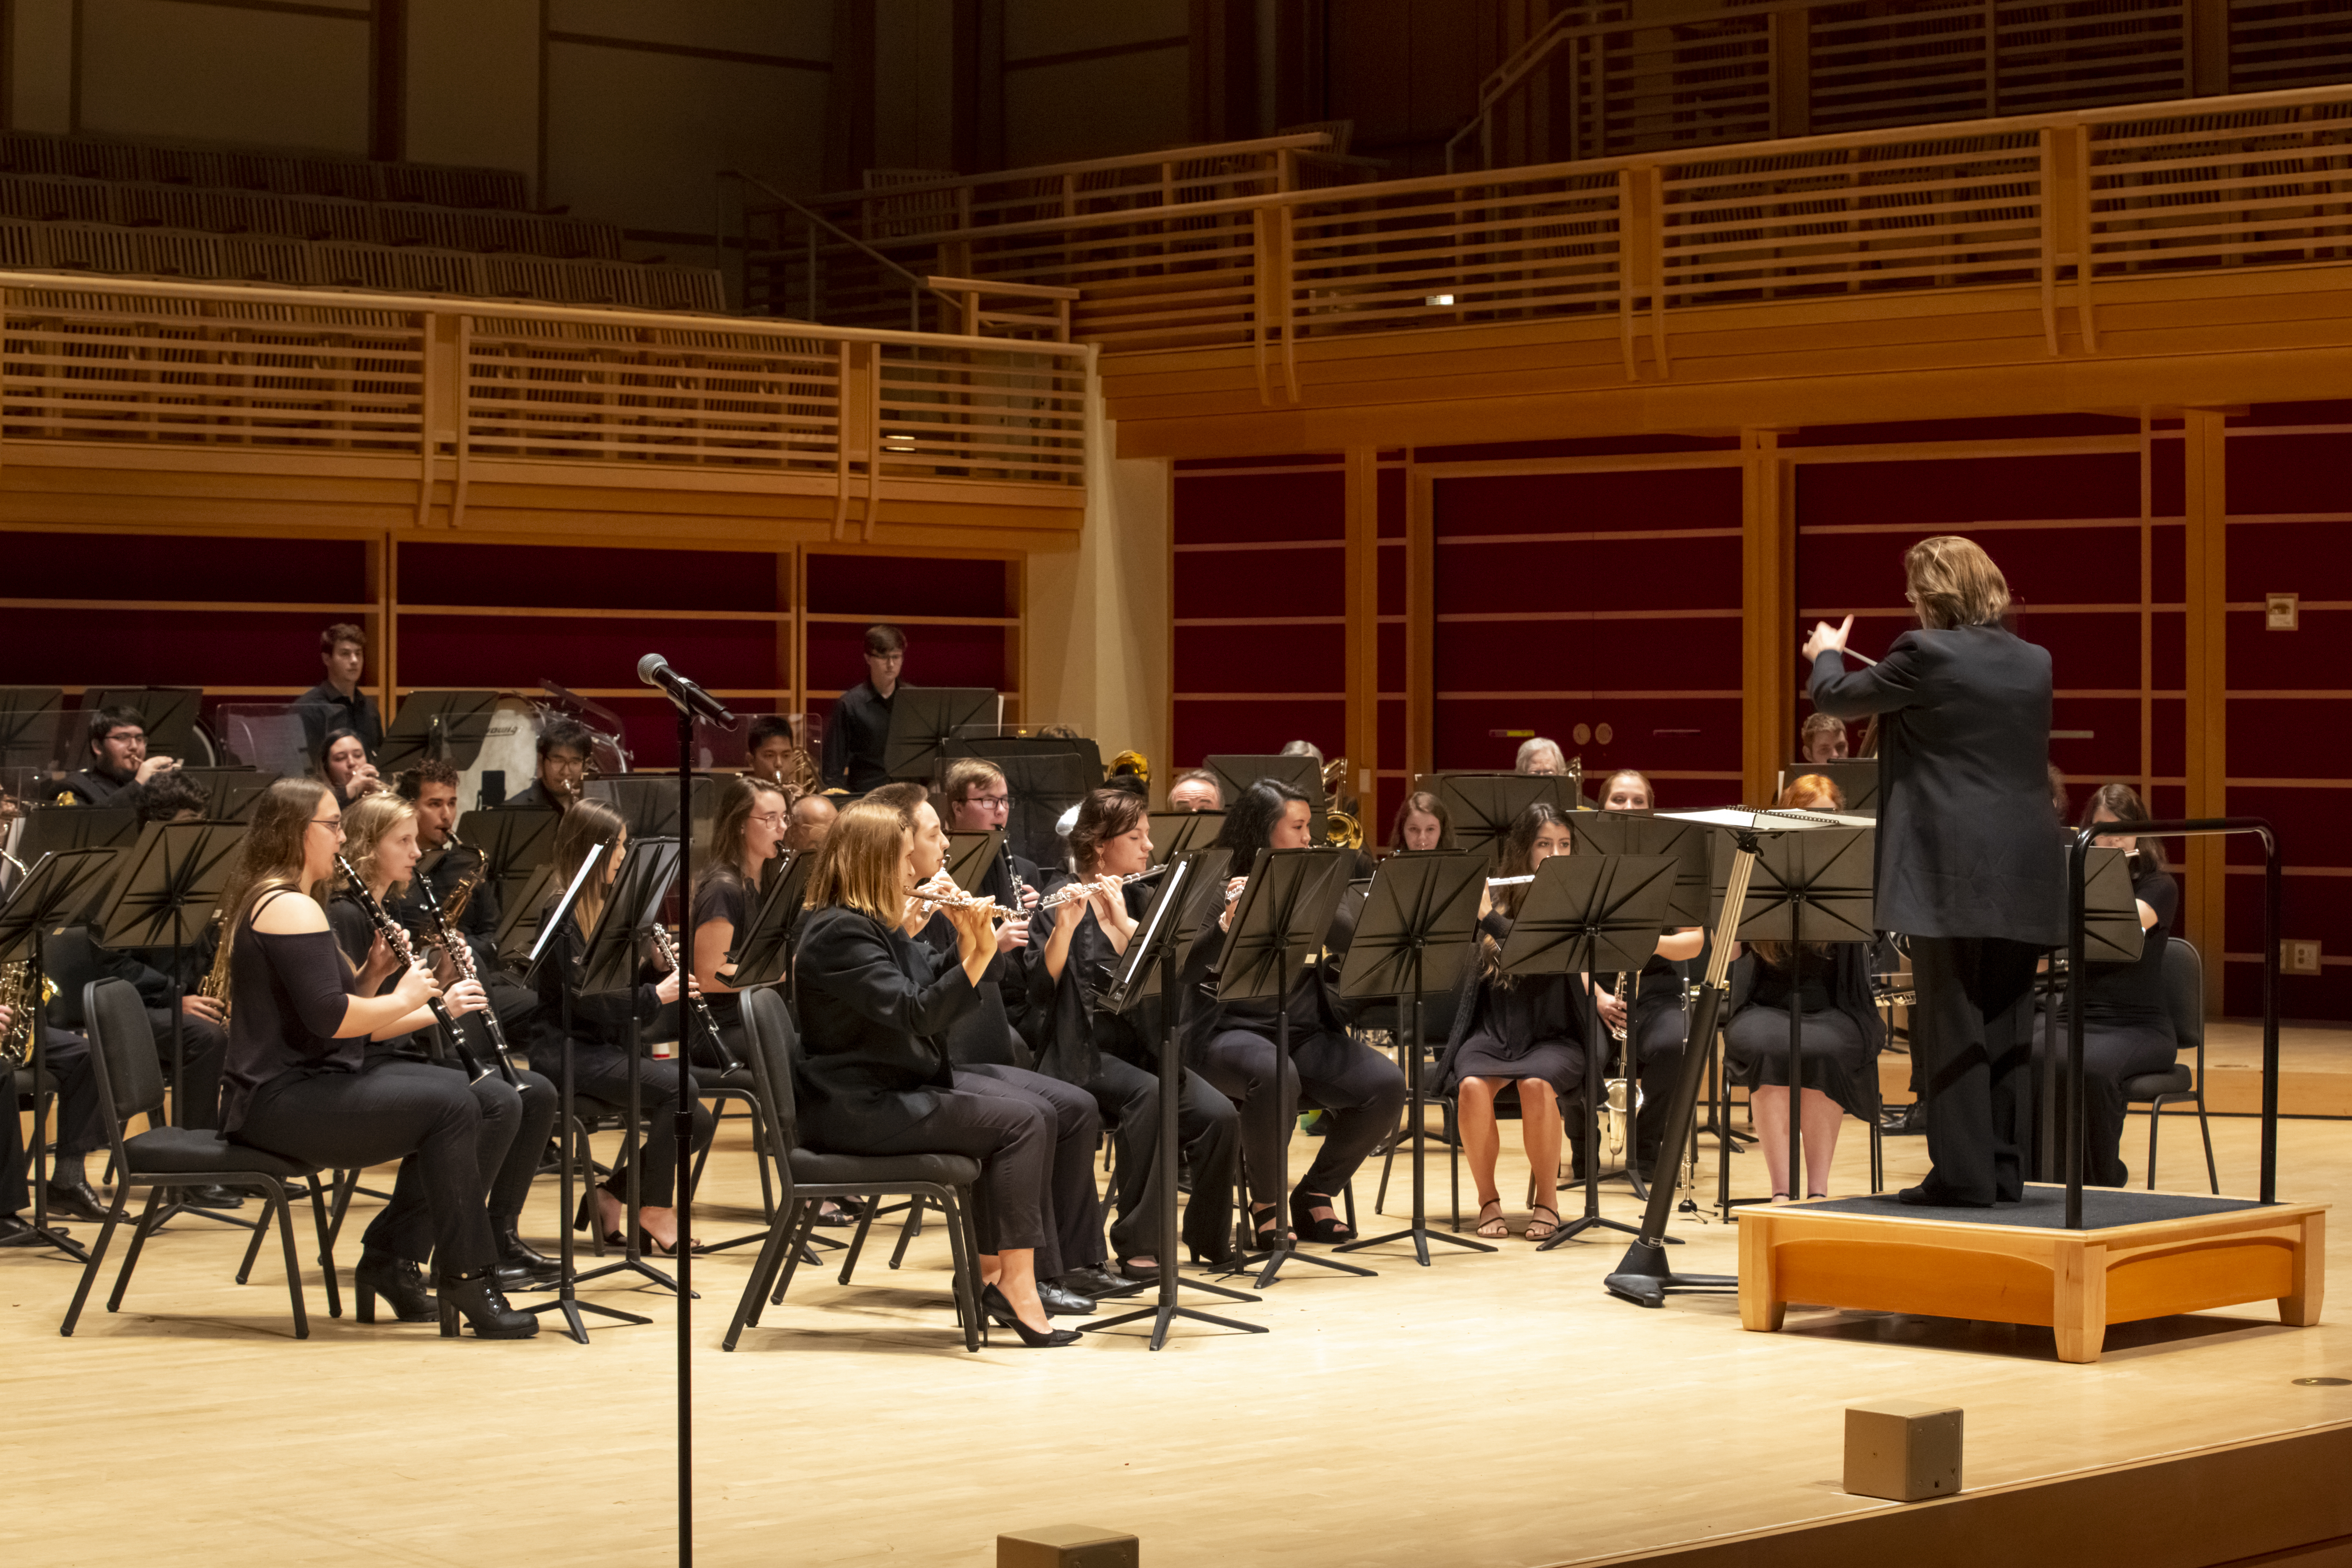 Dr. Mieder conducting the concert band on weill hall stage